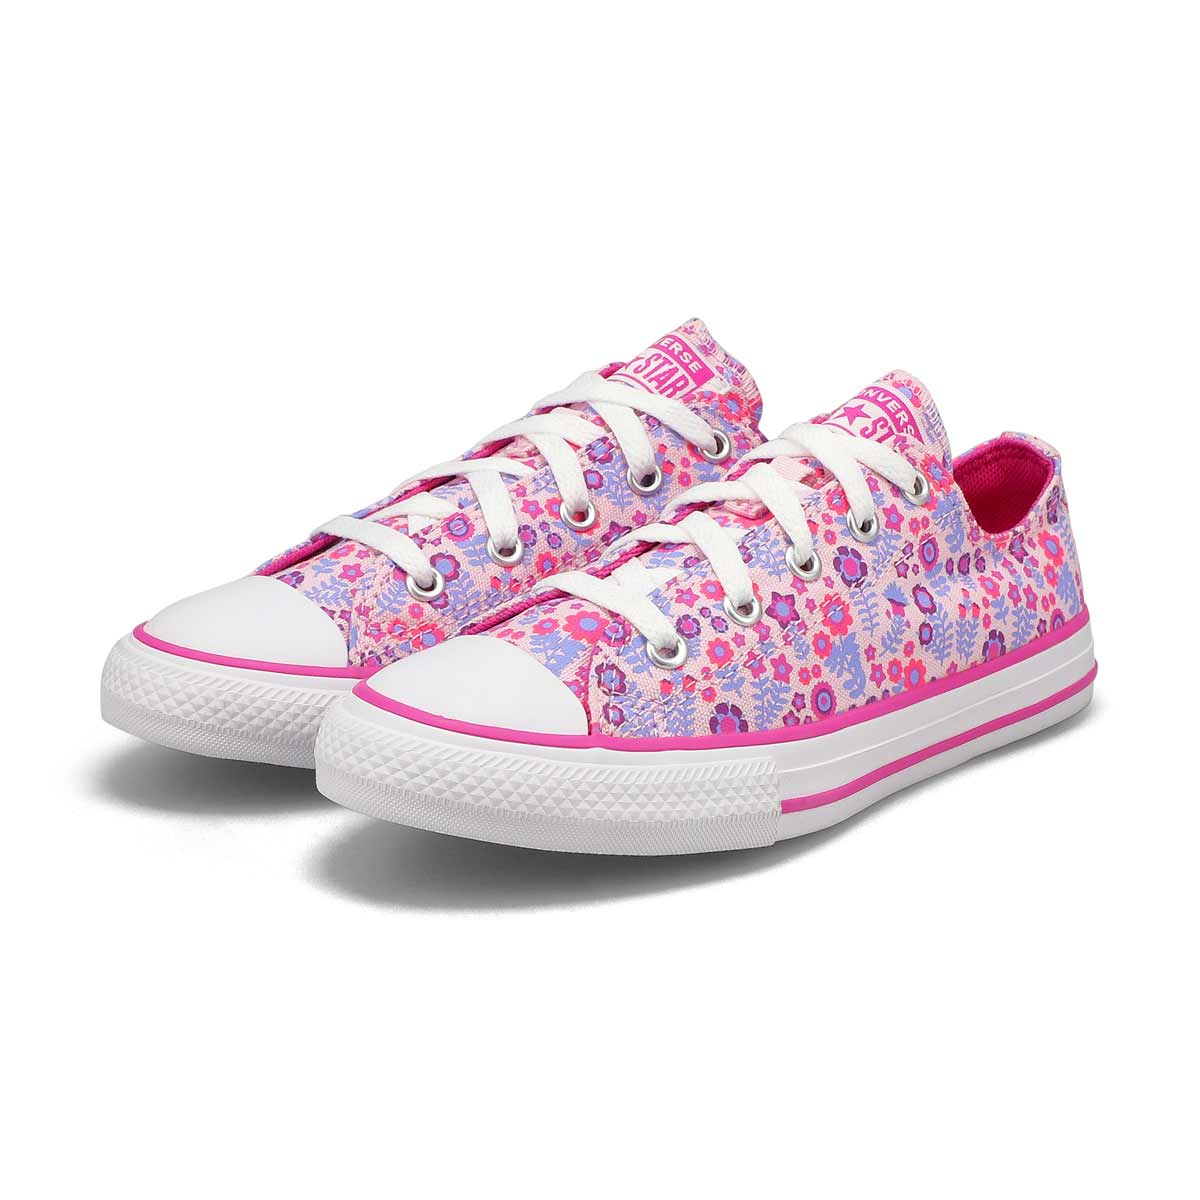 Girls' Chuck Taylor All Star Ditsy Floral Sneaker